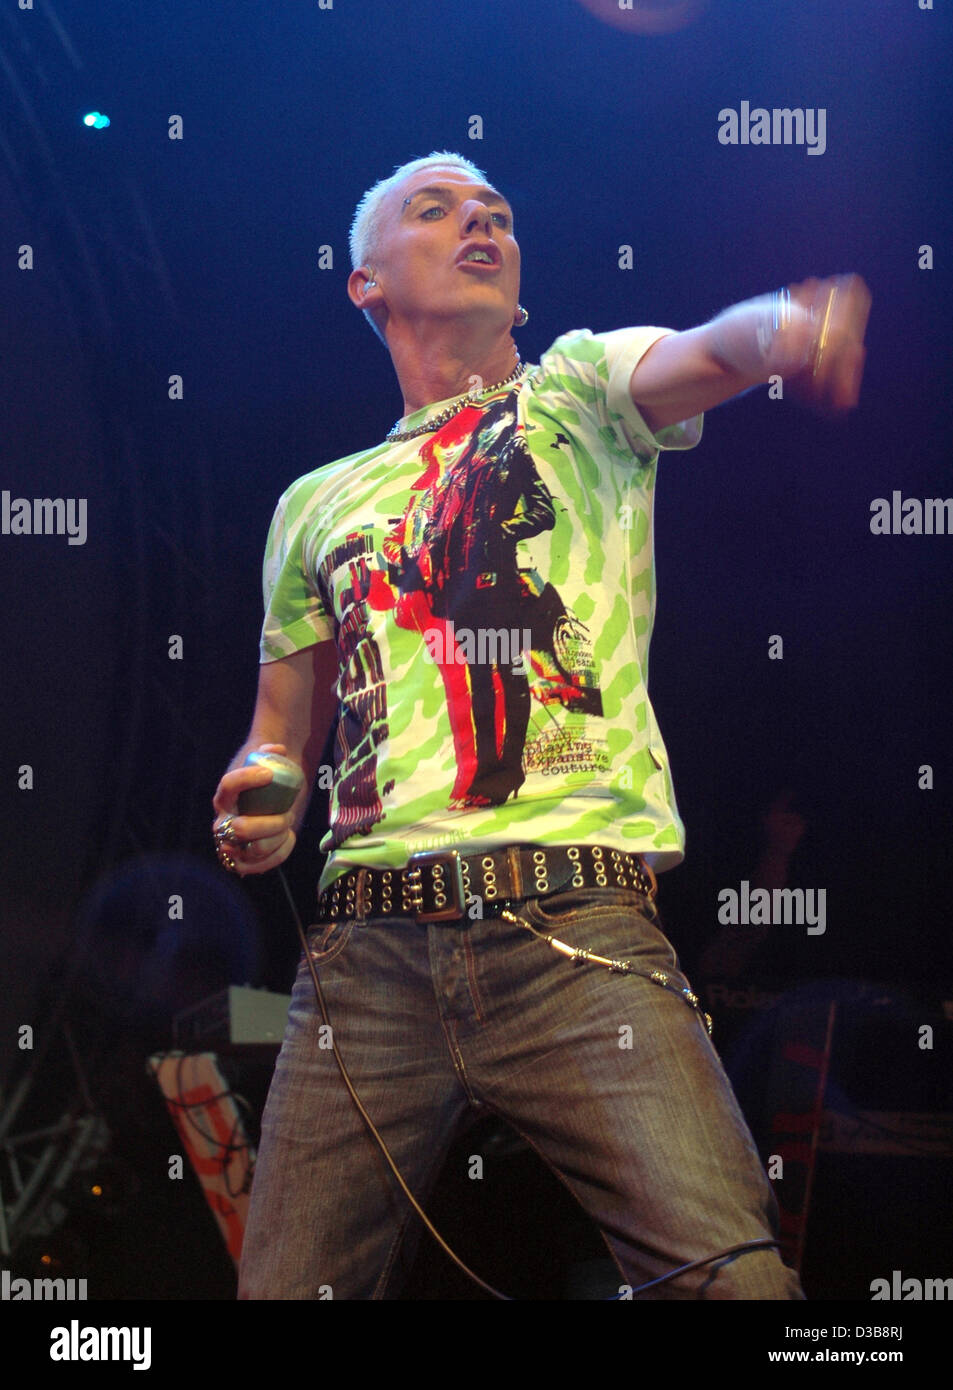 (dpa files) - H.P. Baxxter, singer of the German techno band Scooter, performs during a concert in Hamburg, Germany, 18 December 2004. Stock Photo